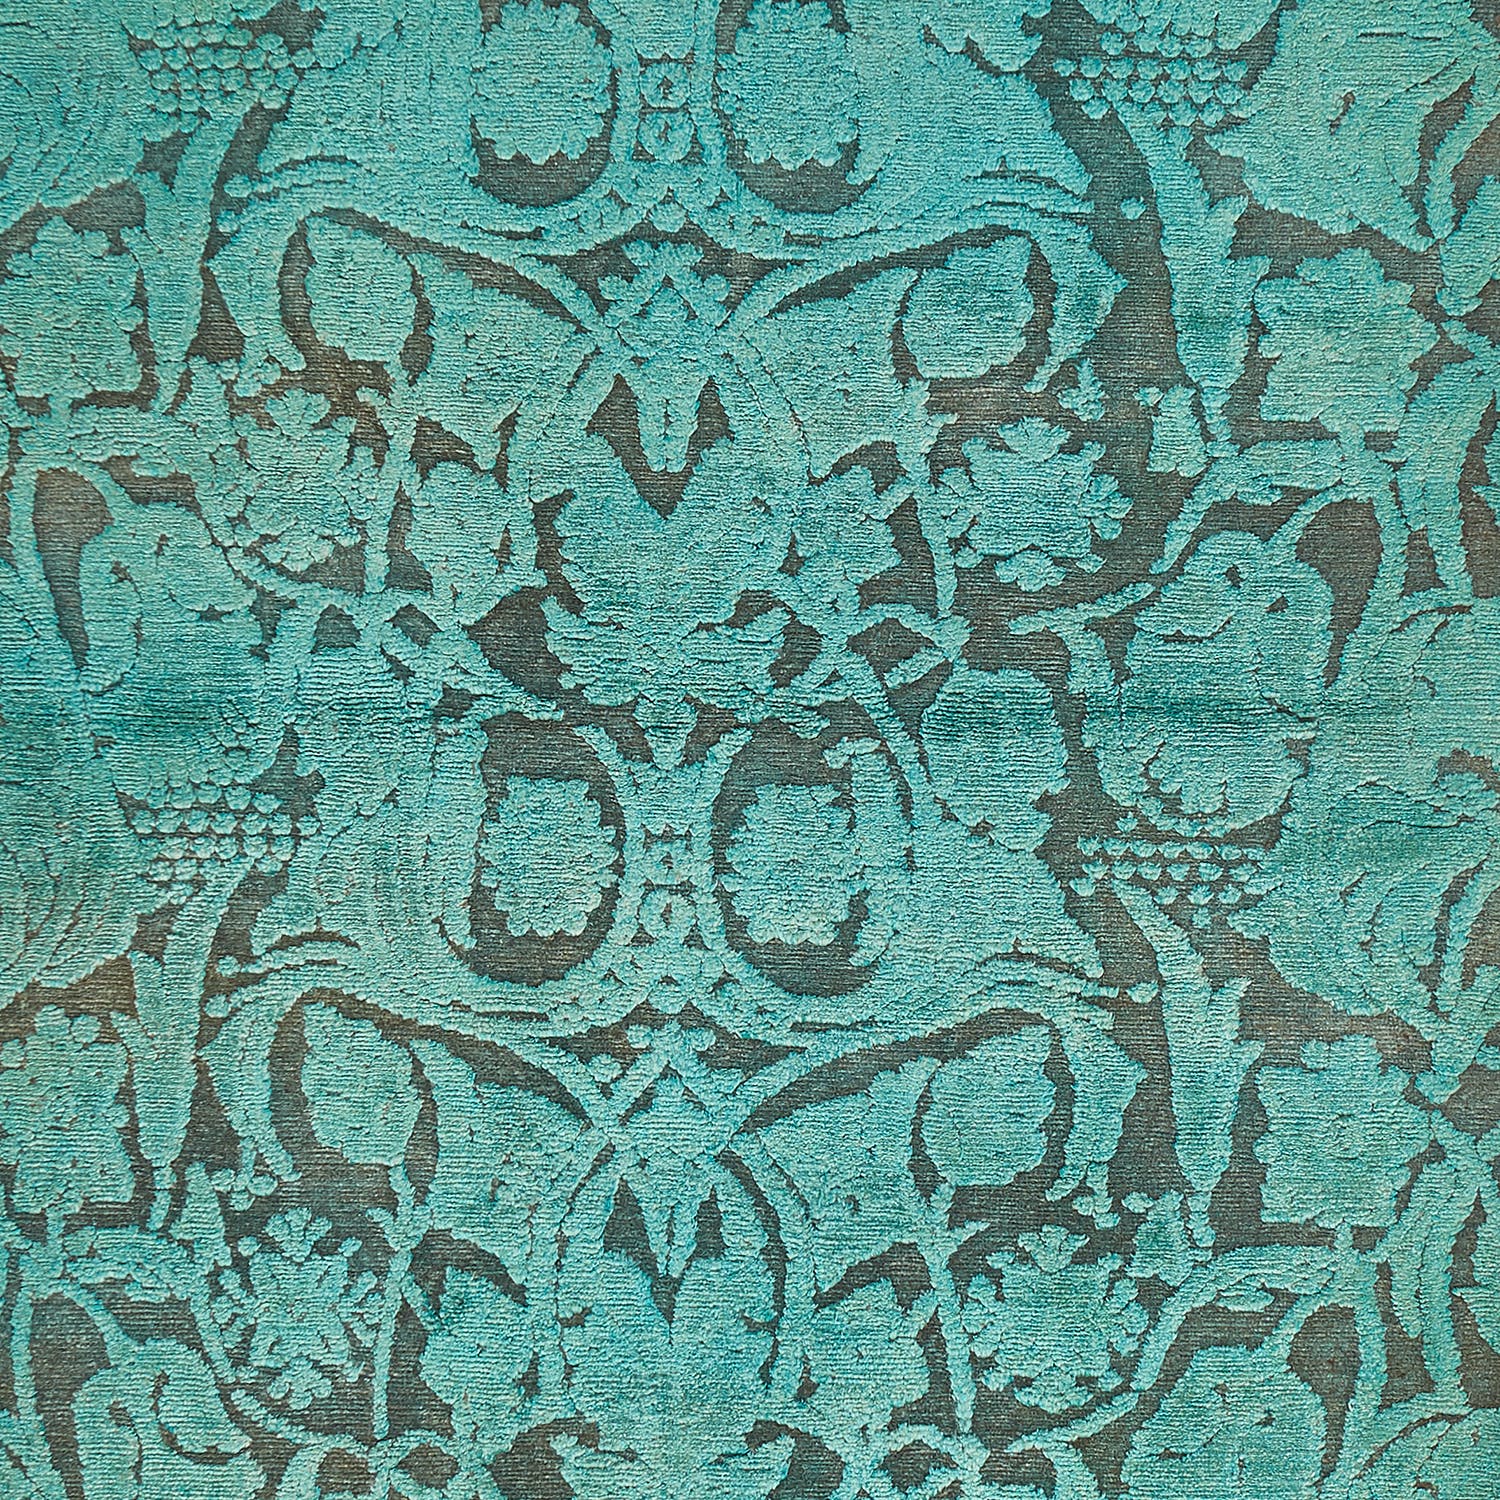 Elegant brocade fabric with intricate floral motifs and symmetrical designs.